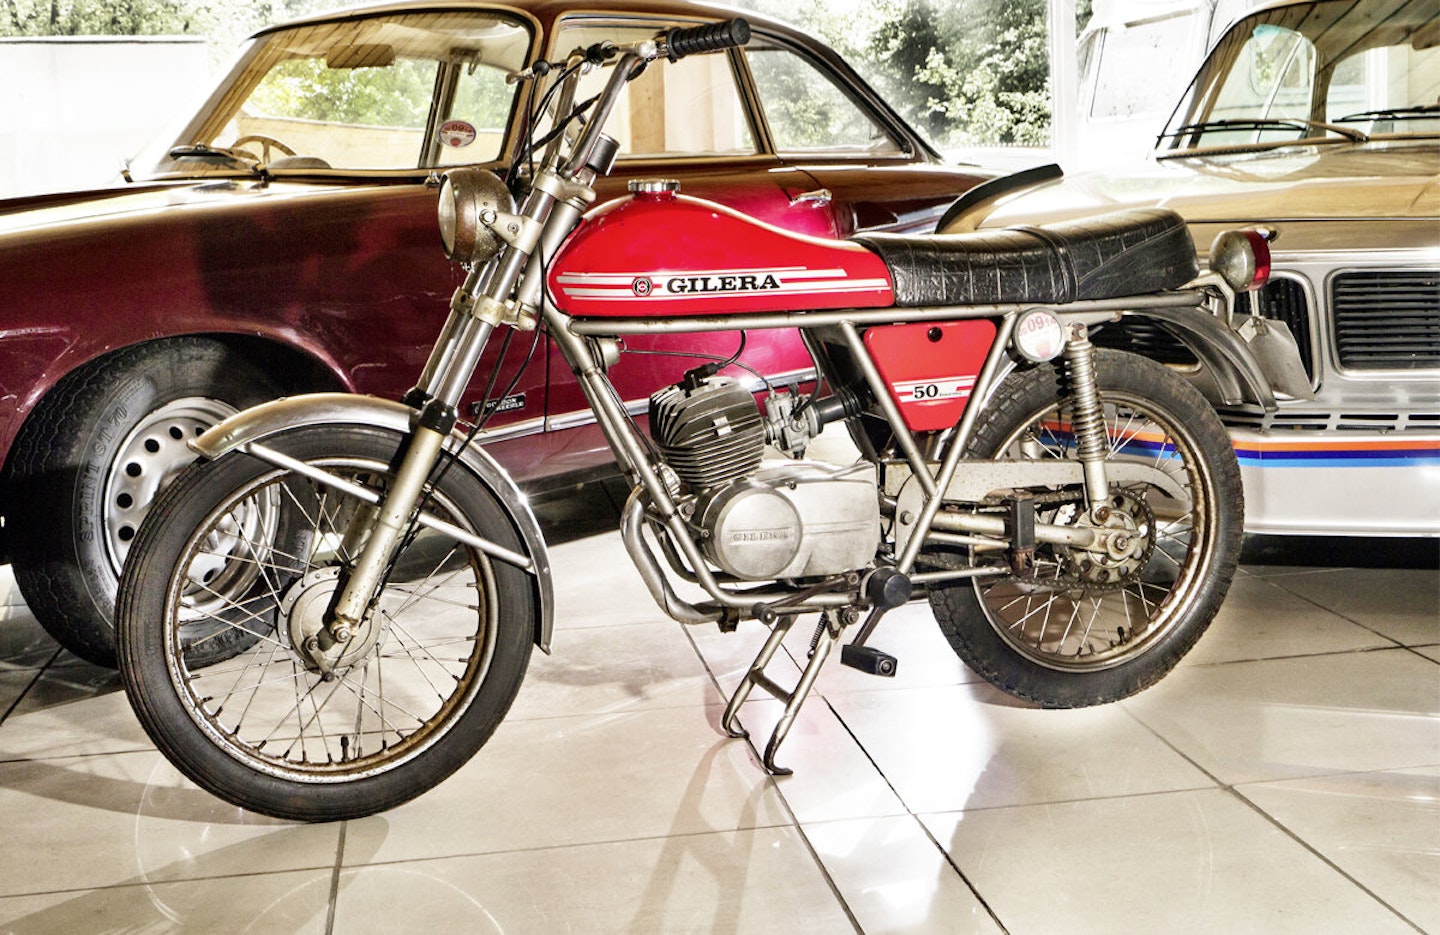 A Gilera just like this was Michael’s first road bike